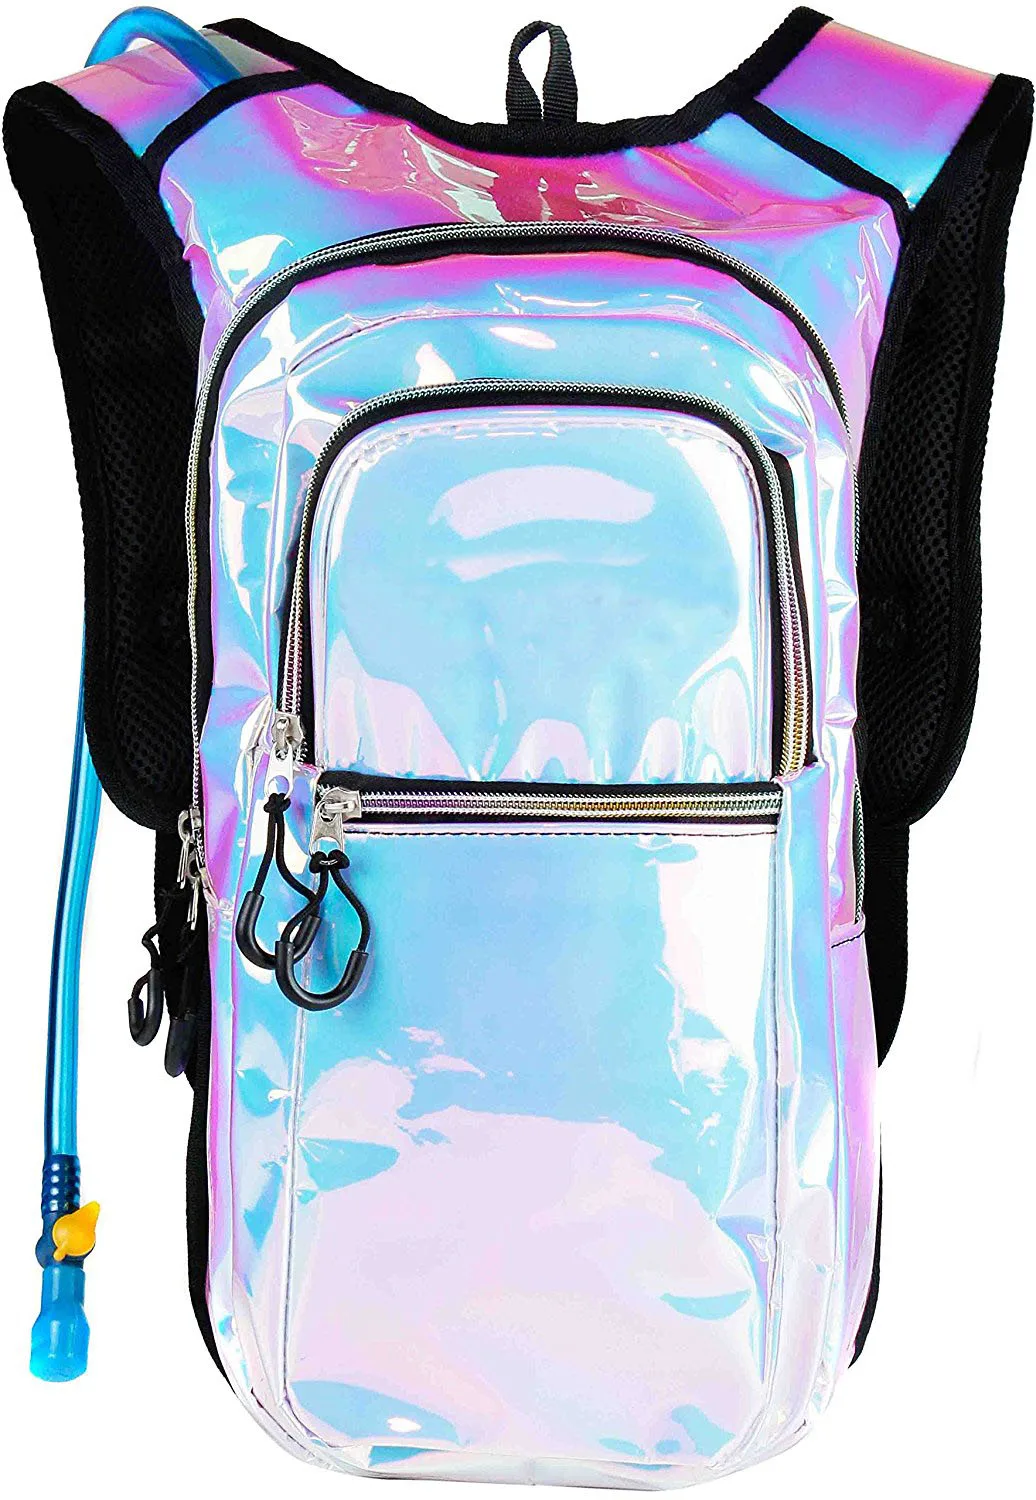 Rave Hydration Pack Backpack With 2l Water Bladder For Festivals,Raves ...